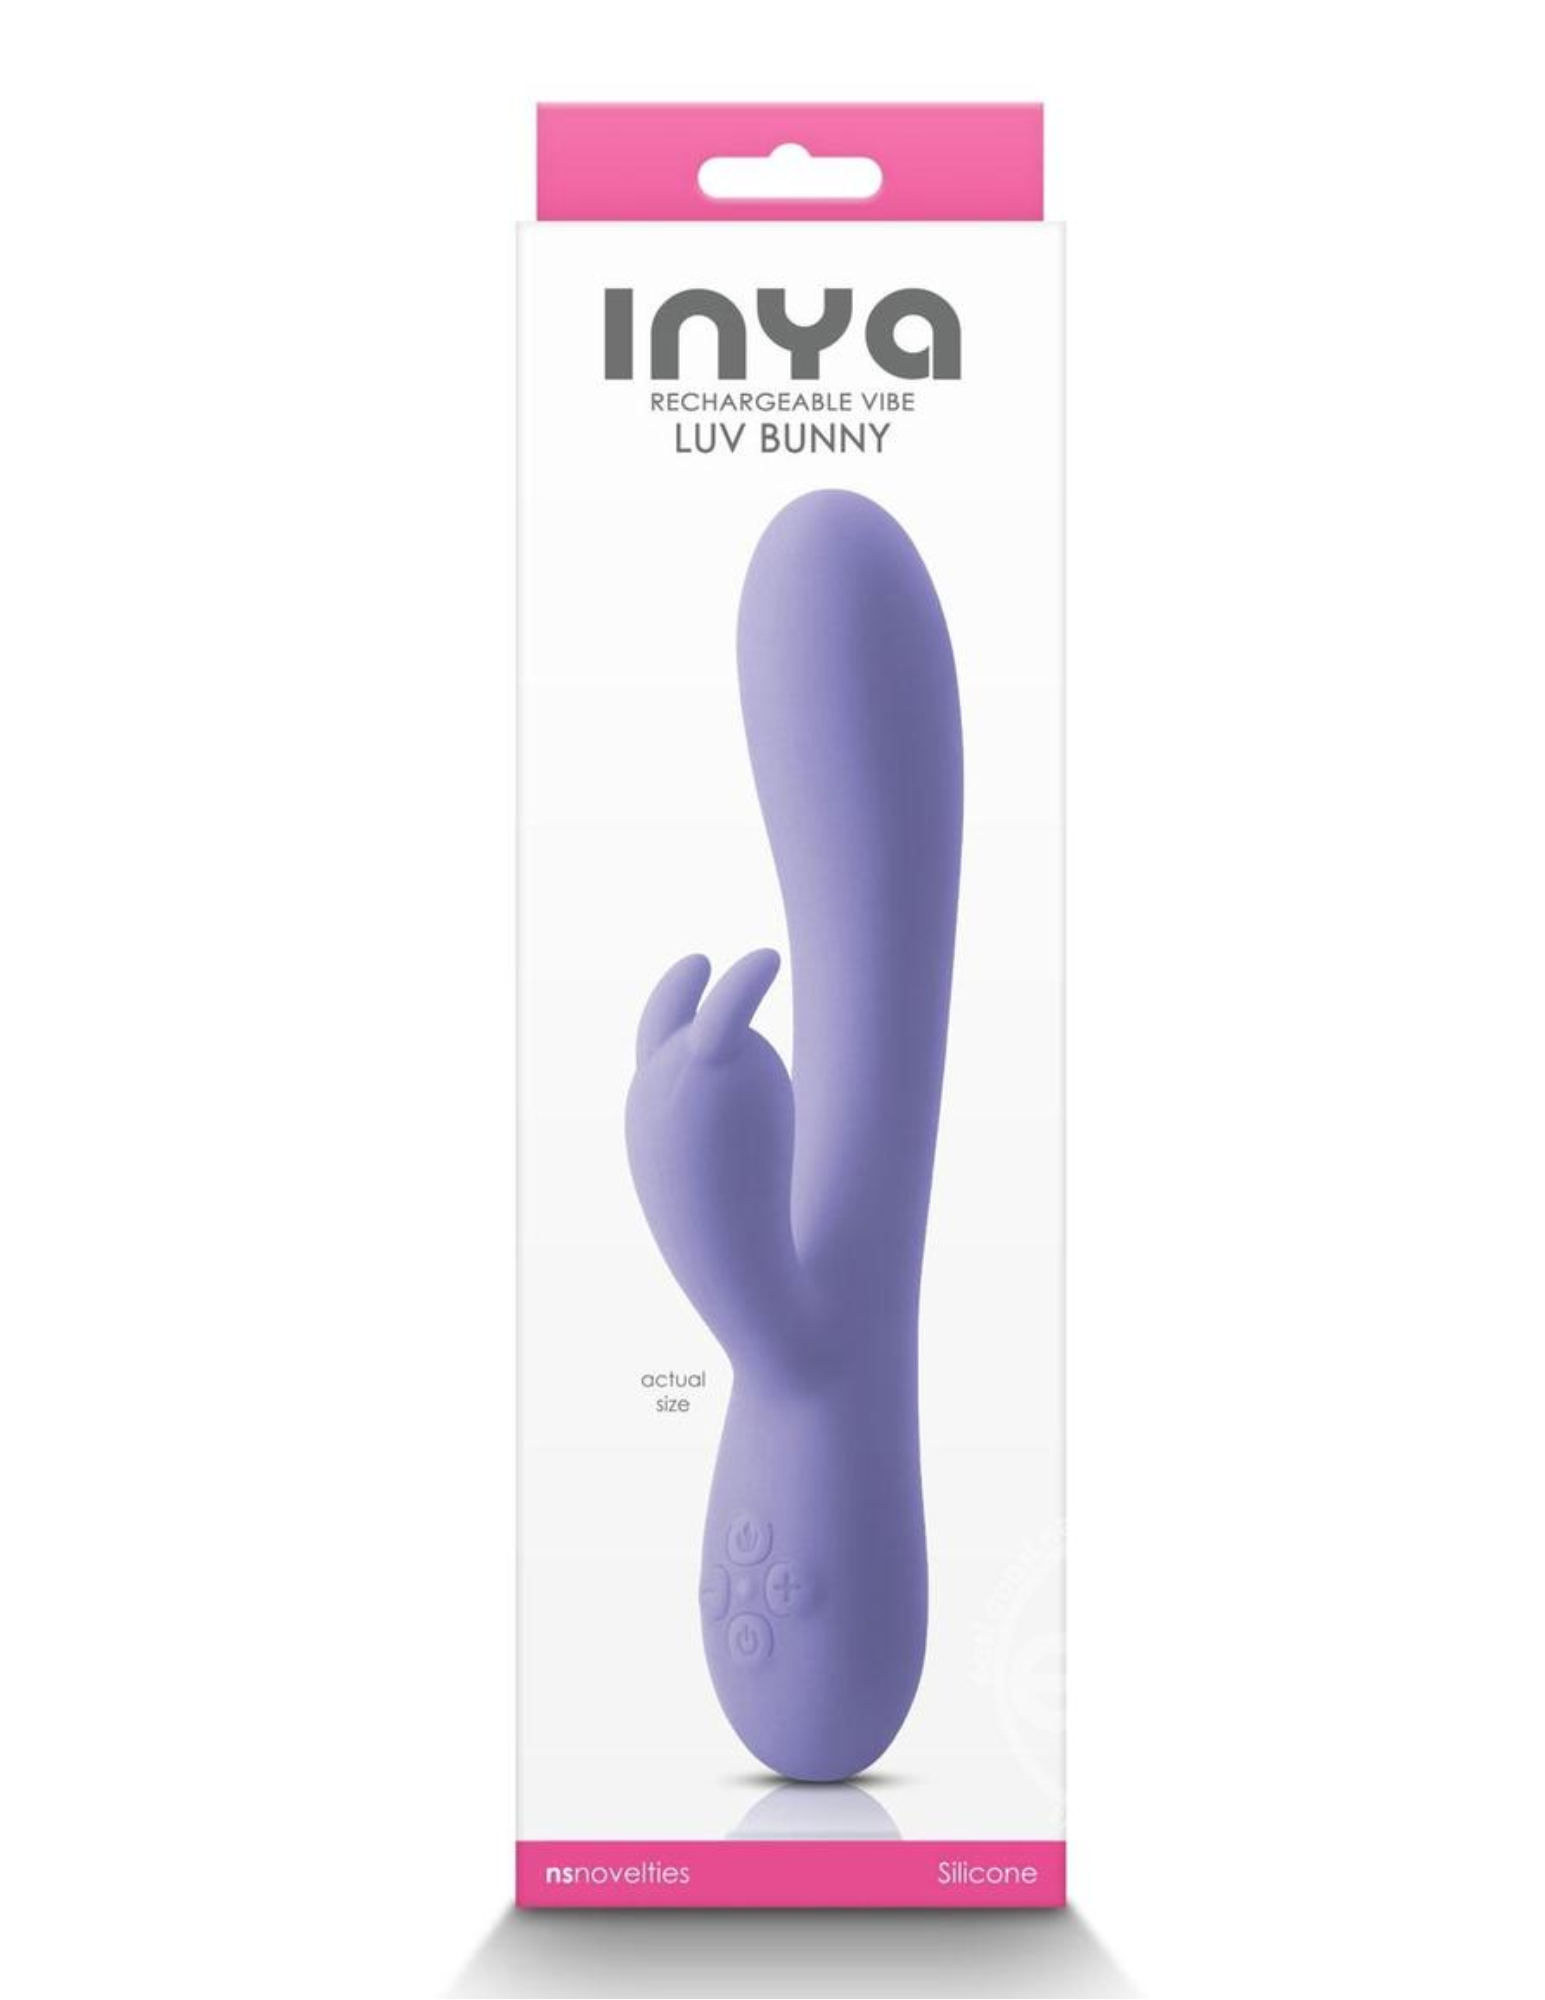 Photo of the front of the box for the nya Luv Bunny (purple) from NS Novelties.